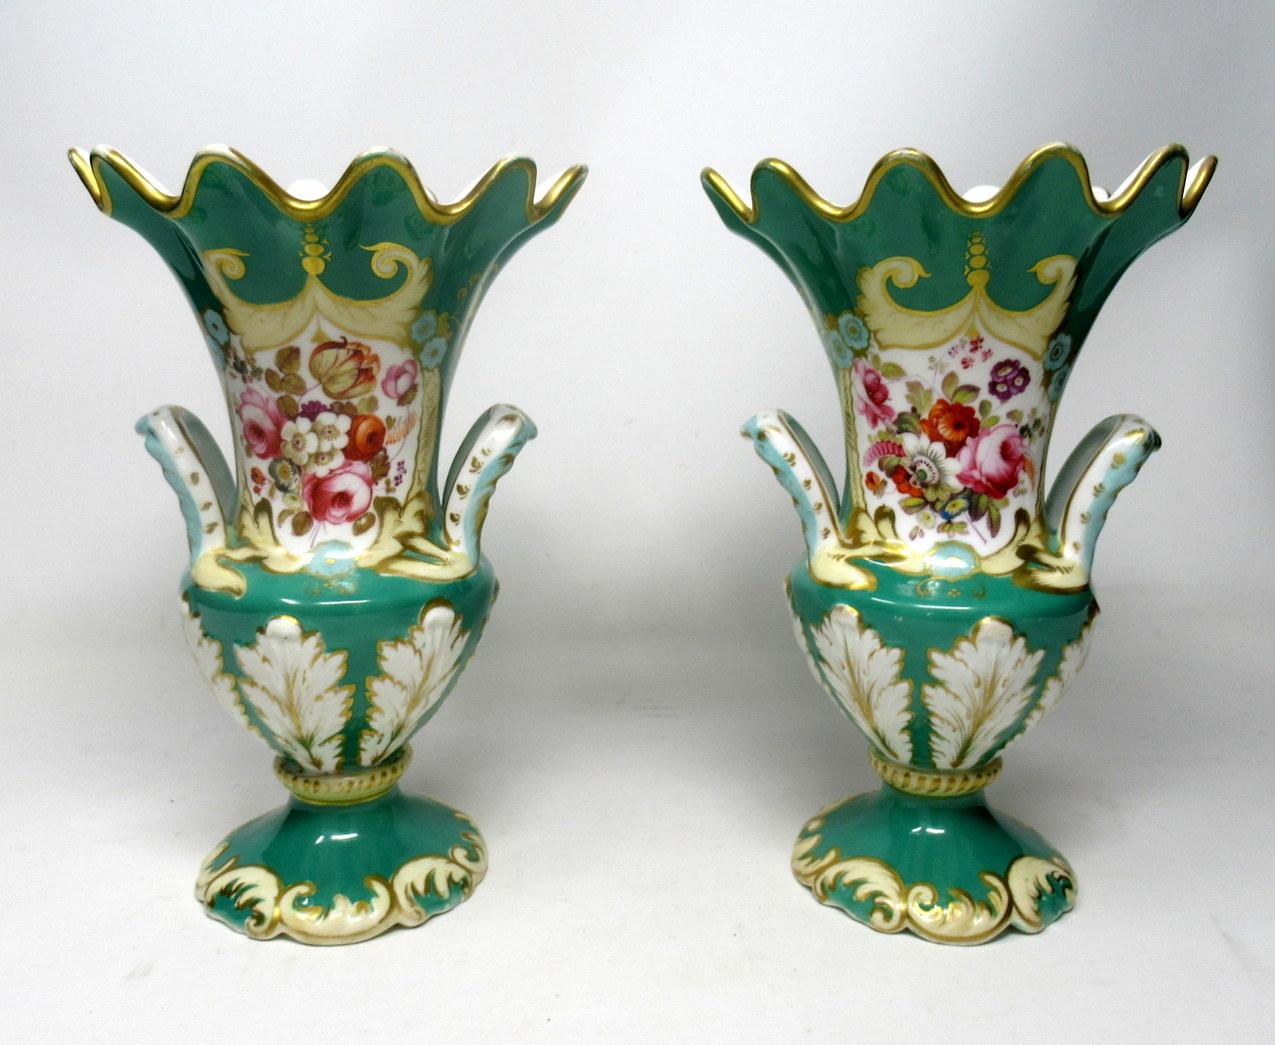 An exceptionally fine quality identical pair of English Rococo Revival twin handle mantle vases by Samuel Alcock, circa second quarter of the 19th century. 

Each vase of baluster outline with unusual flaired rims and wavy gilded edges, twin